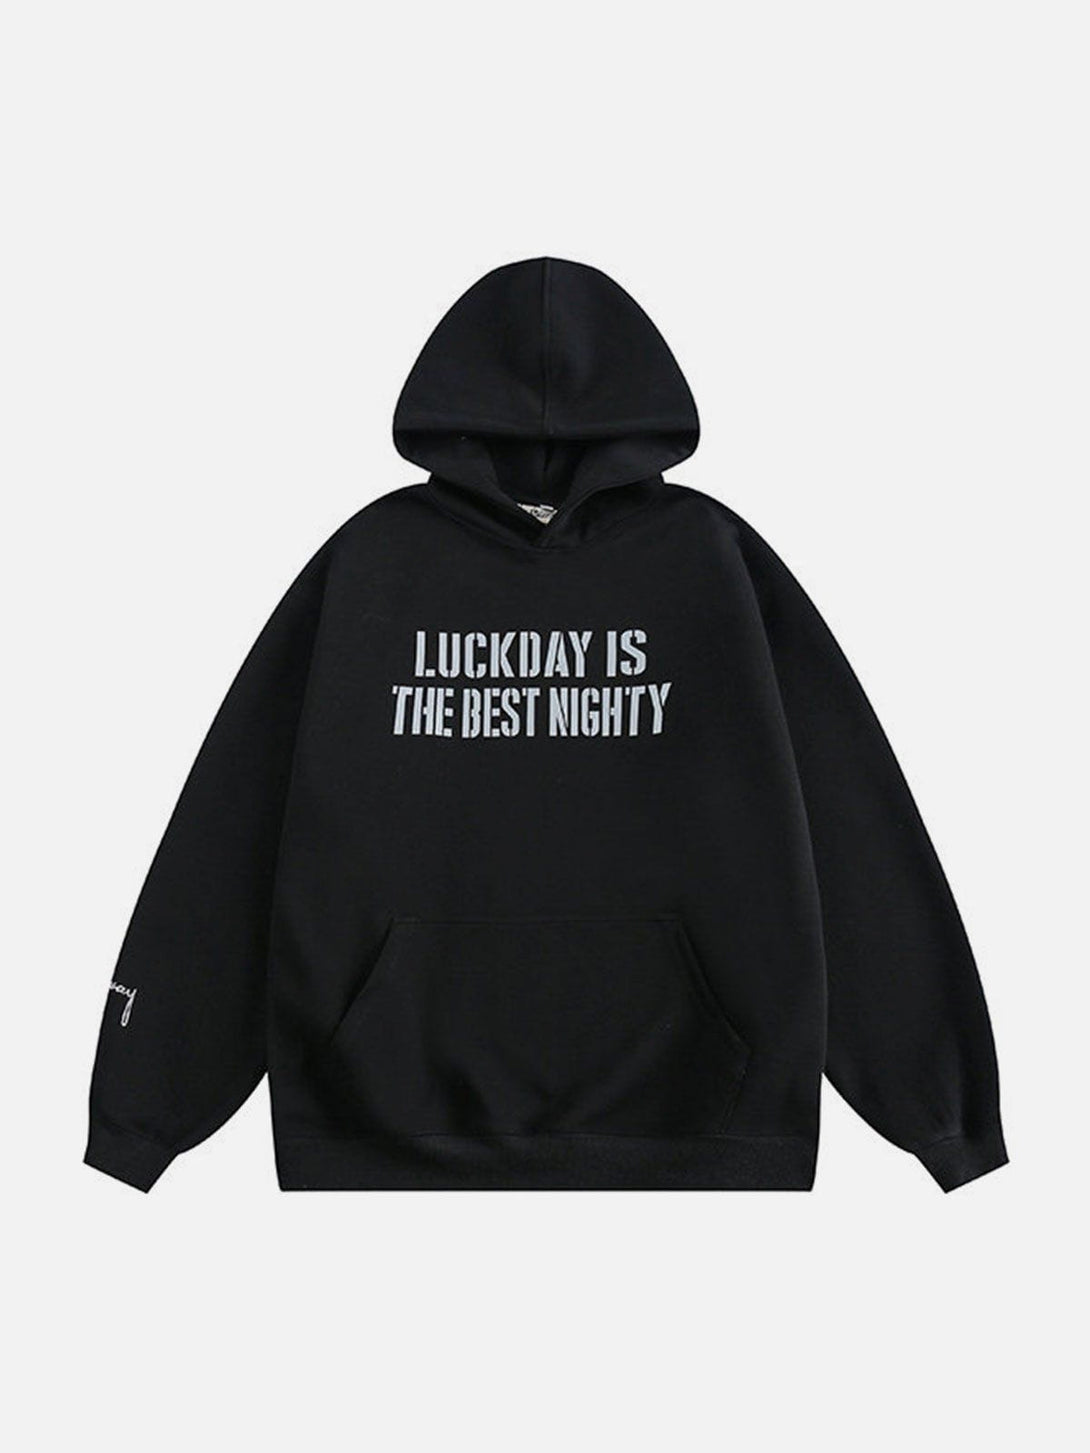 Levefly - Letter Embroidery Loose Hoodie - Streetwear Fashion - levefly.com